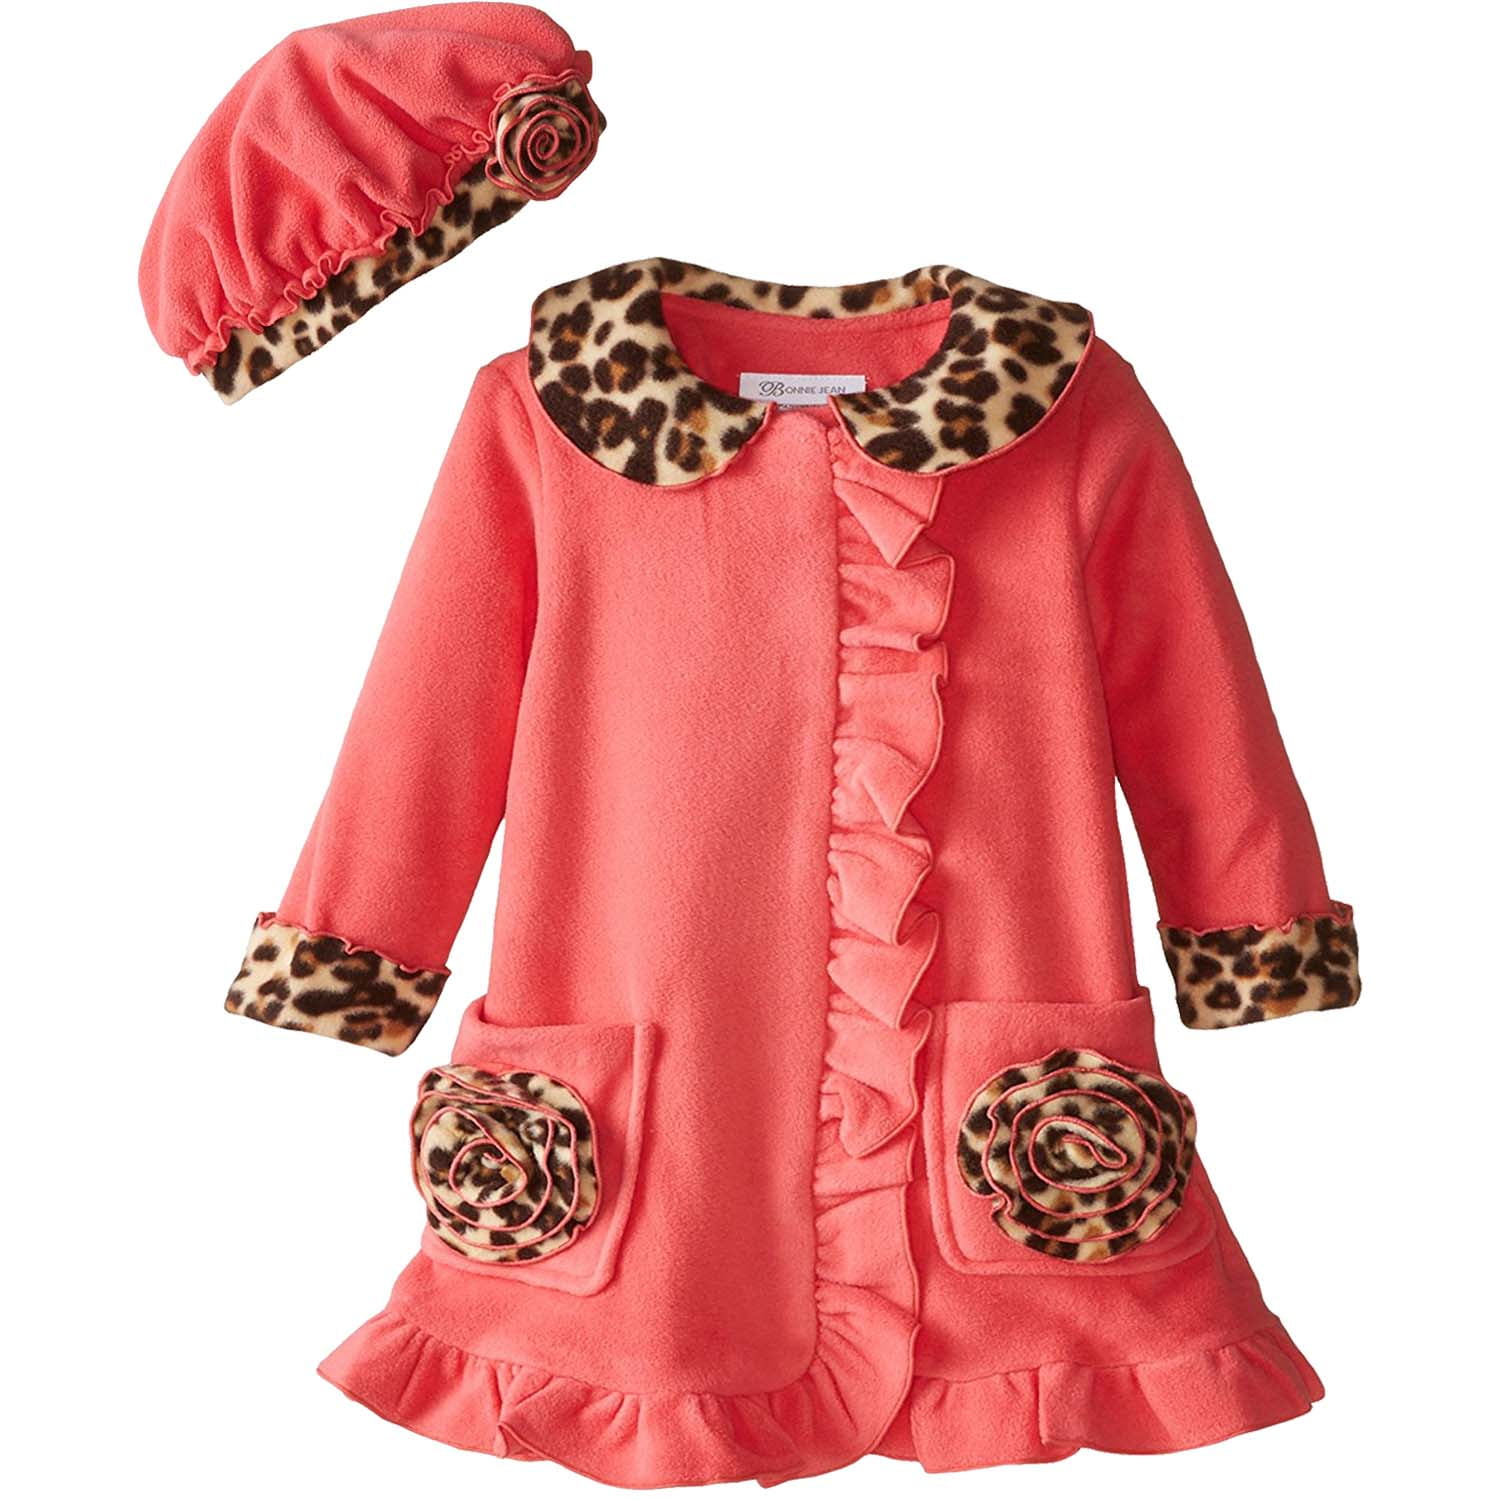 Bonnie Baby Baby Girls Infant Coral Bird Applique Knit Dress 24 Months, Coral